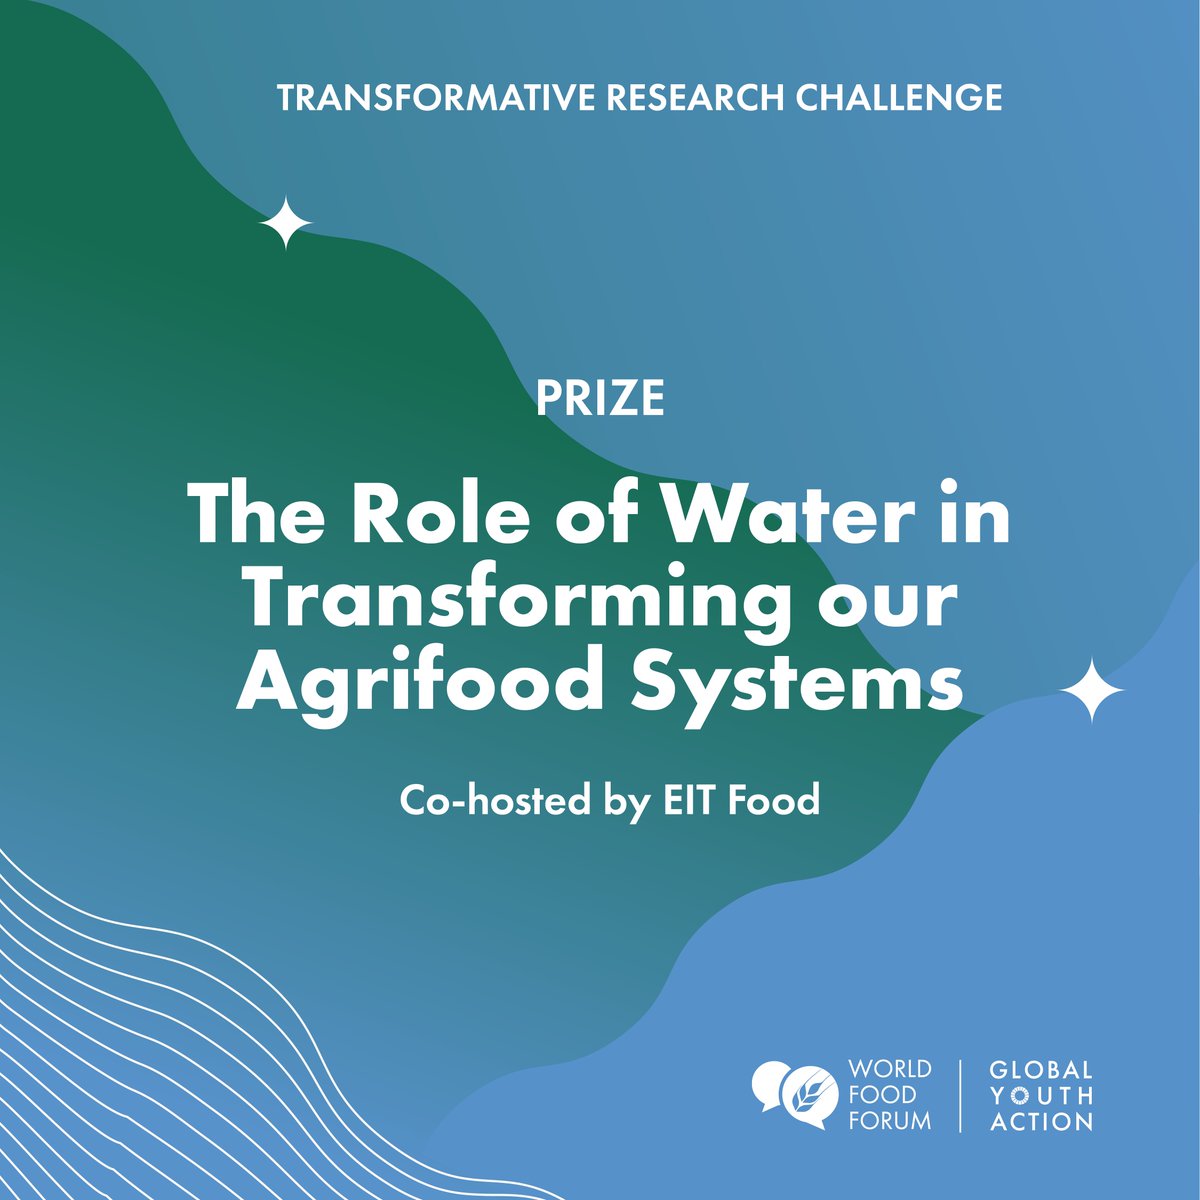 📣 Calling all innovators! We are launching the 'The role of water in our agrifood systems' research prize, co-hosted by EIT Food, for the Transformative Research Challenge. 👉 Read more and apply: world-food-forum.org/innovation-lab…